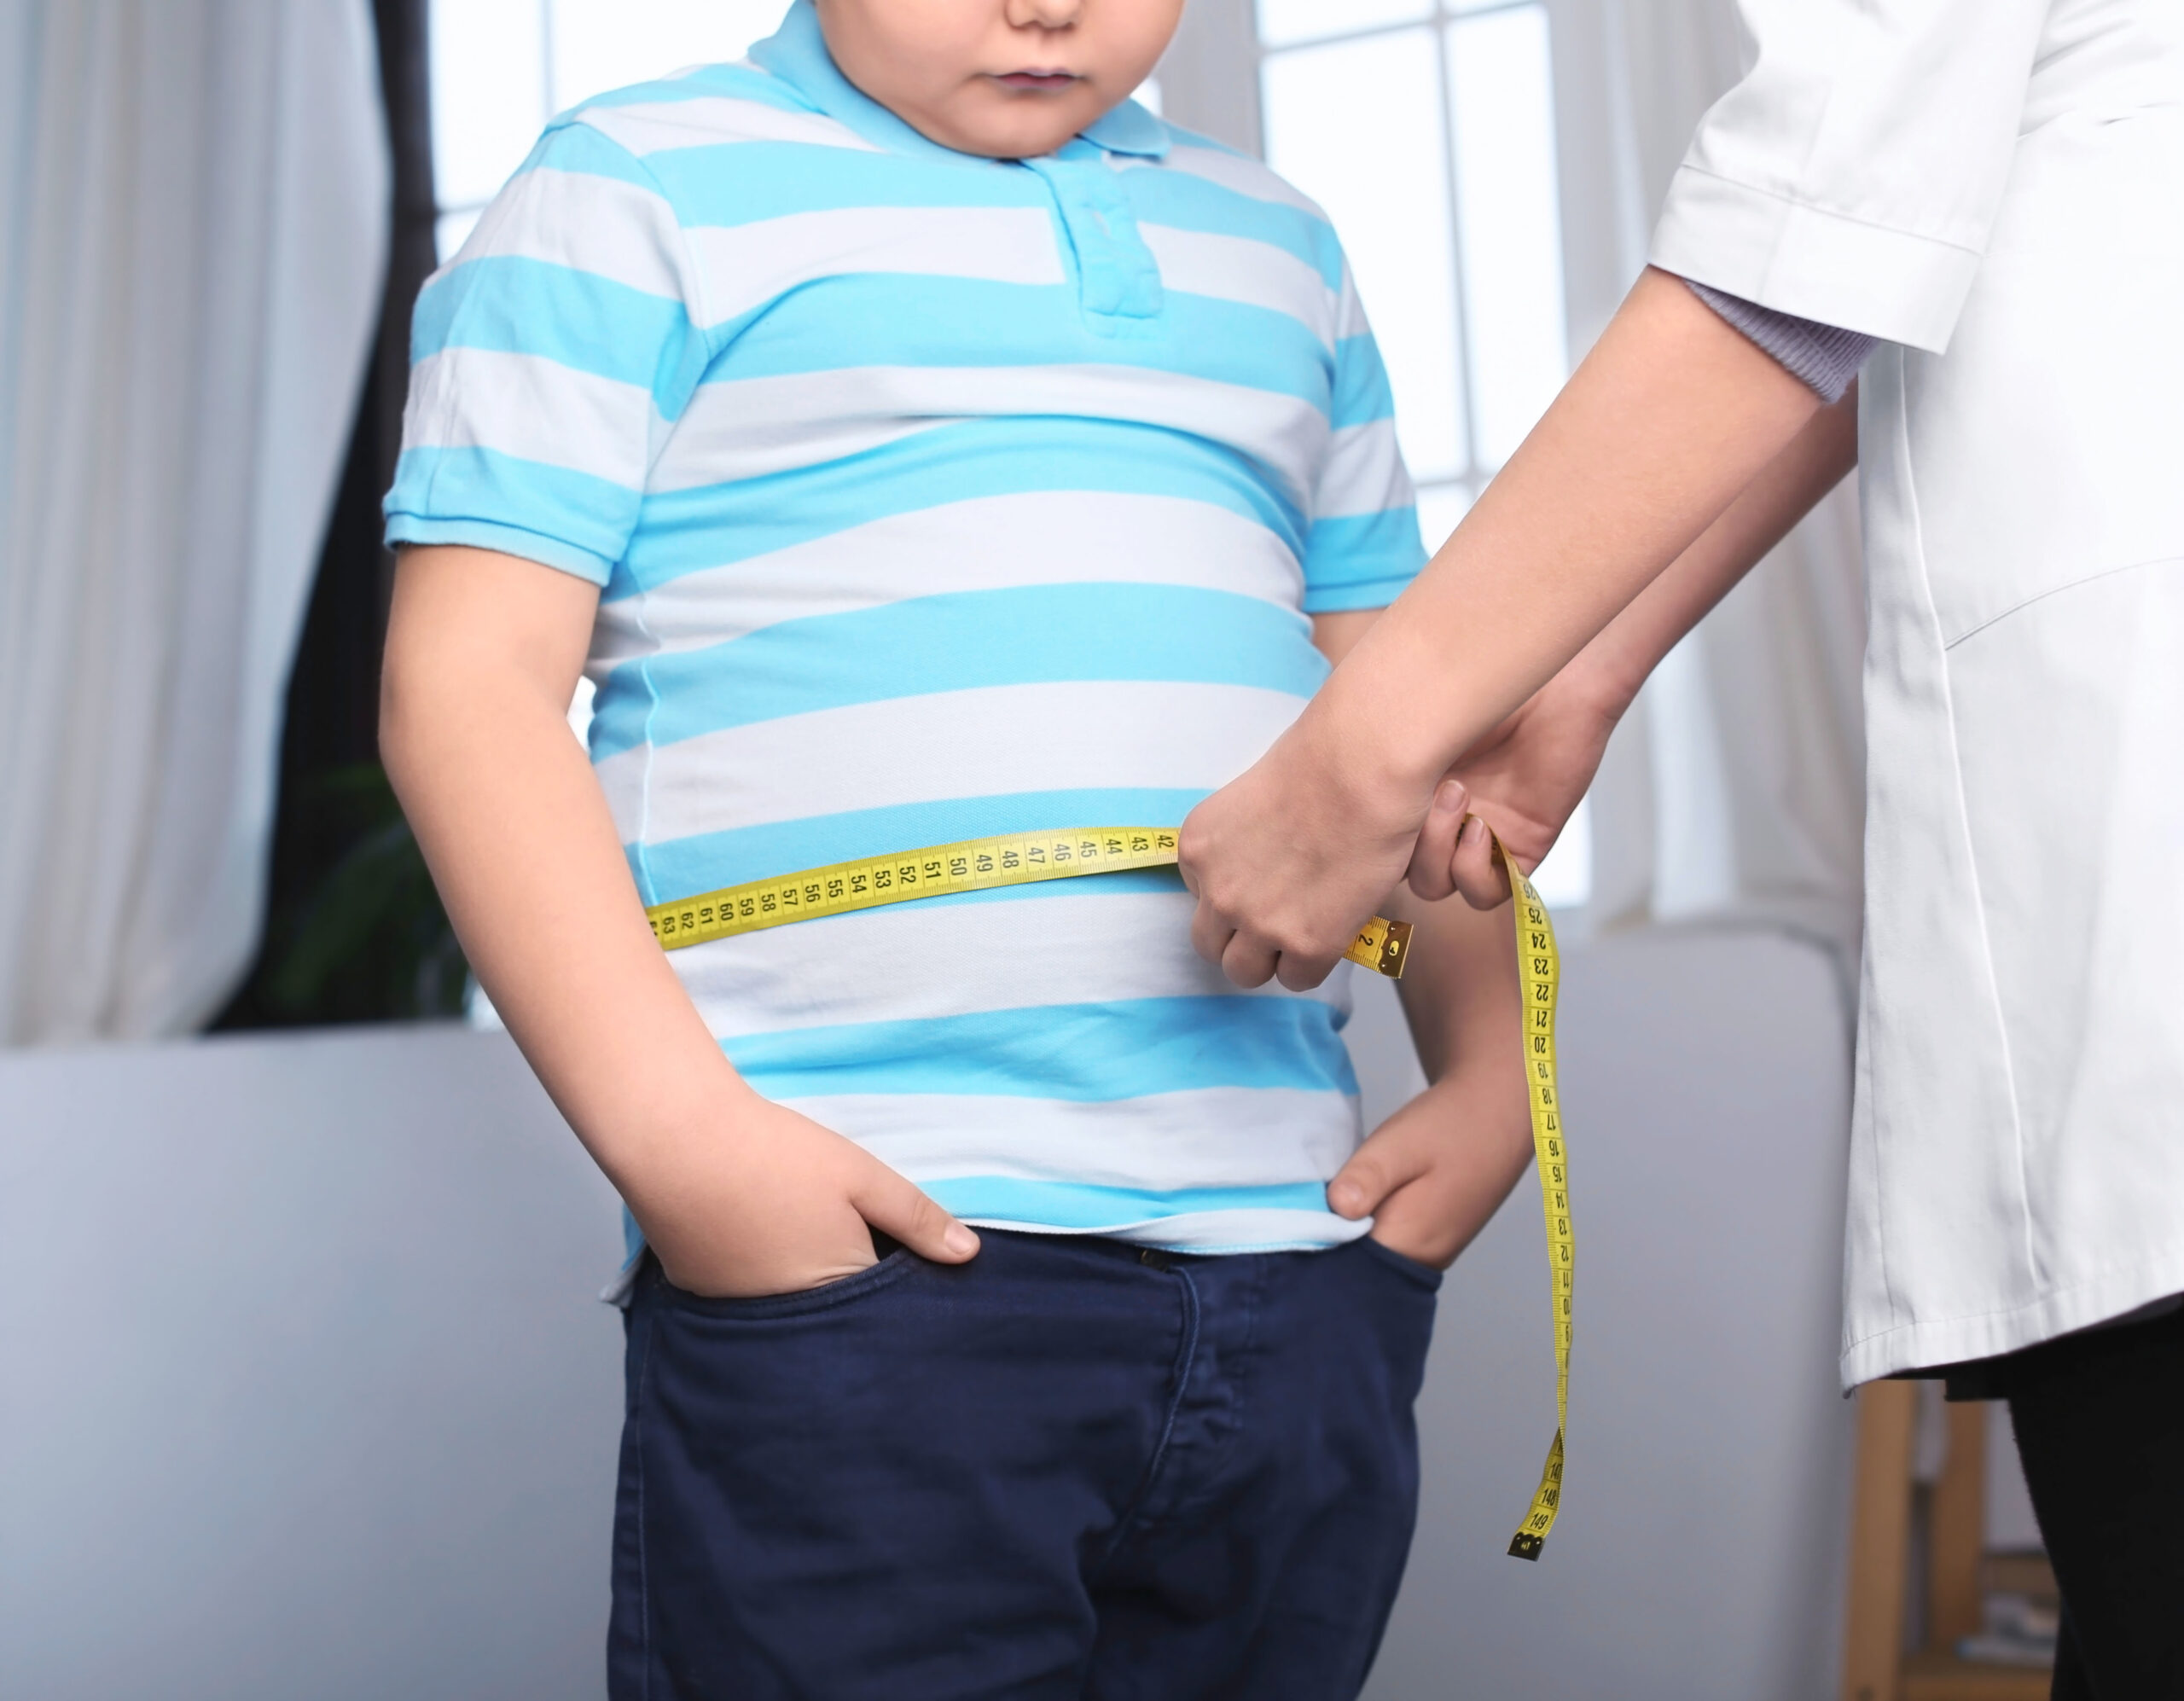 Childhood Obesity: Future Health Issues